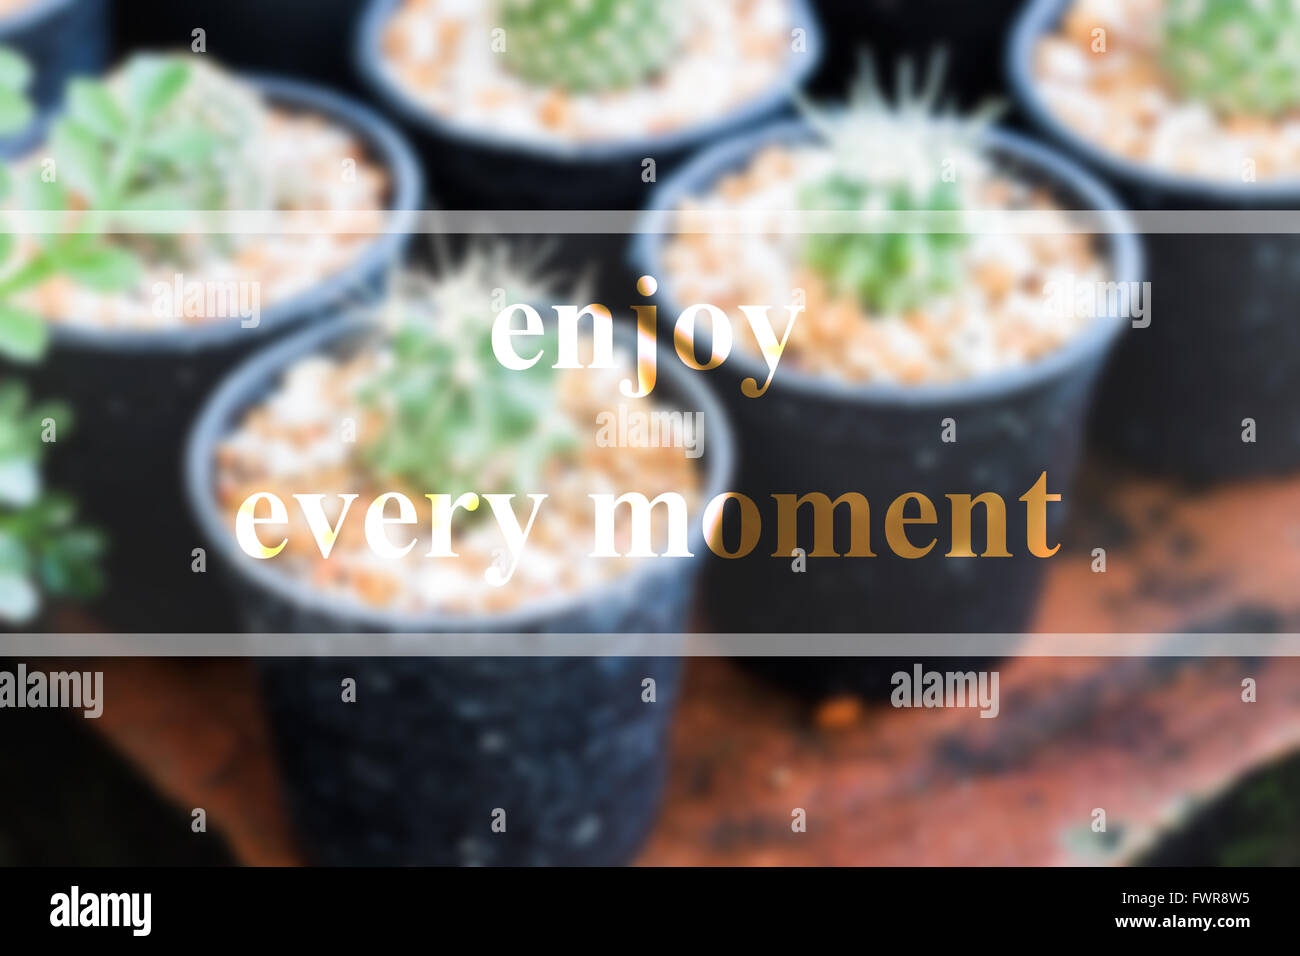 Enjoy every moment inspirational quote on blurred background Stock Photo